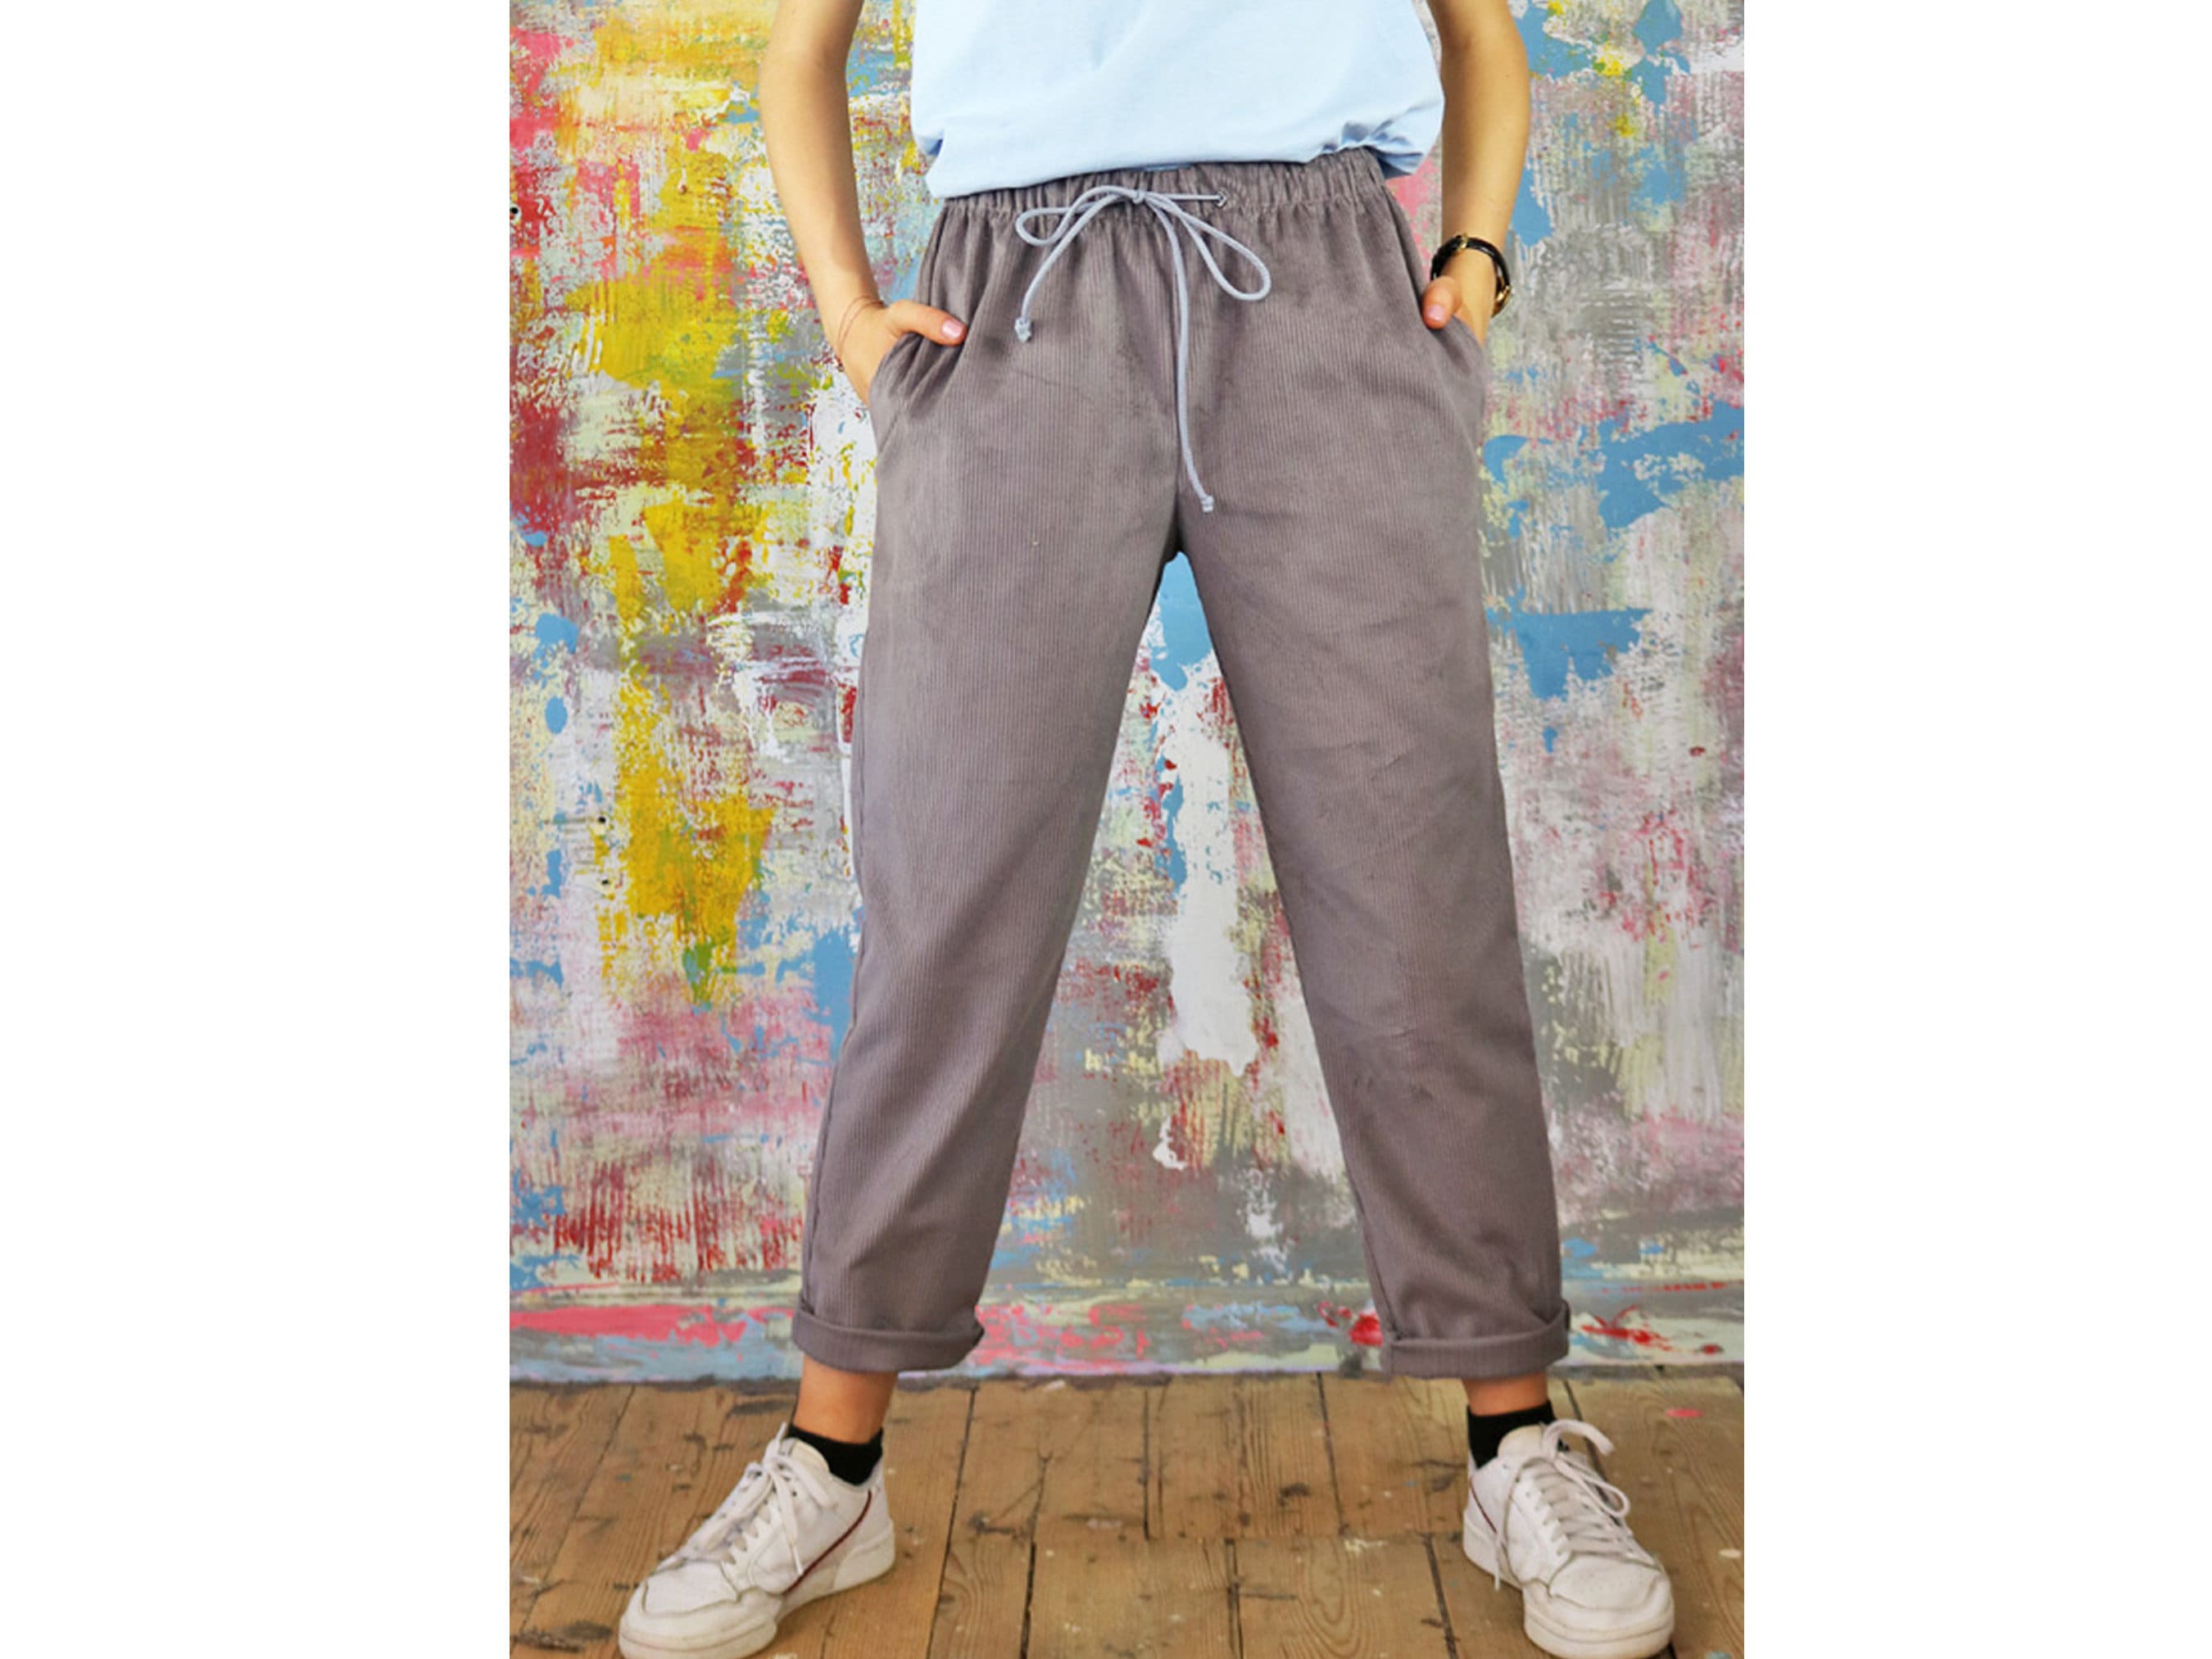  Cotton Drawstring Womens Pants: Clothing, Shoes & Jewelry